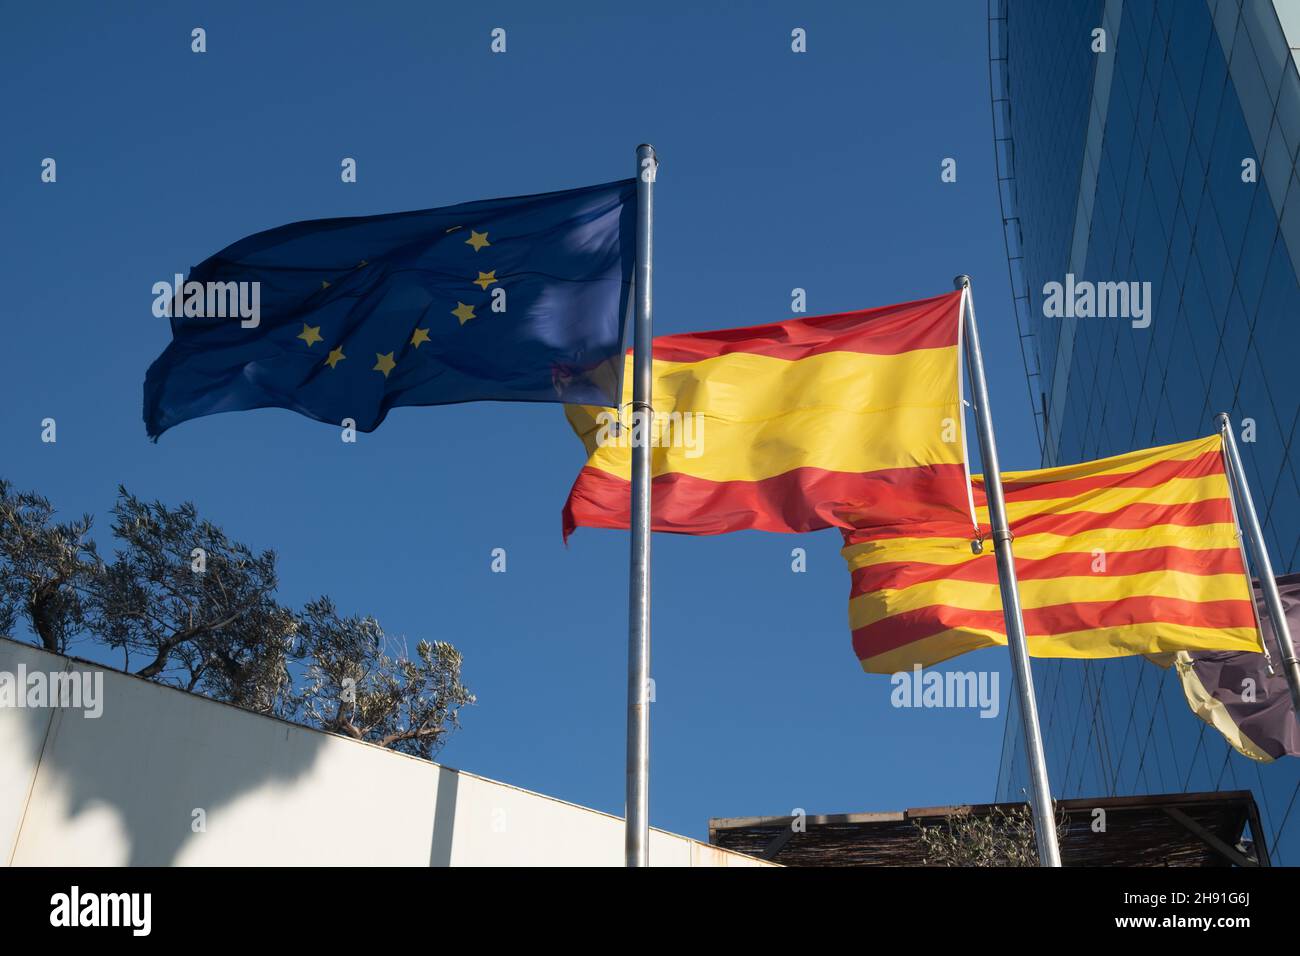 Flags of the EU European Union, Spain and Catalonia waving in sky Stock Photo